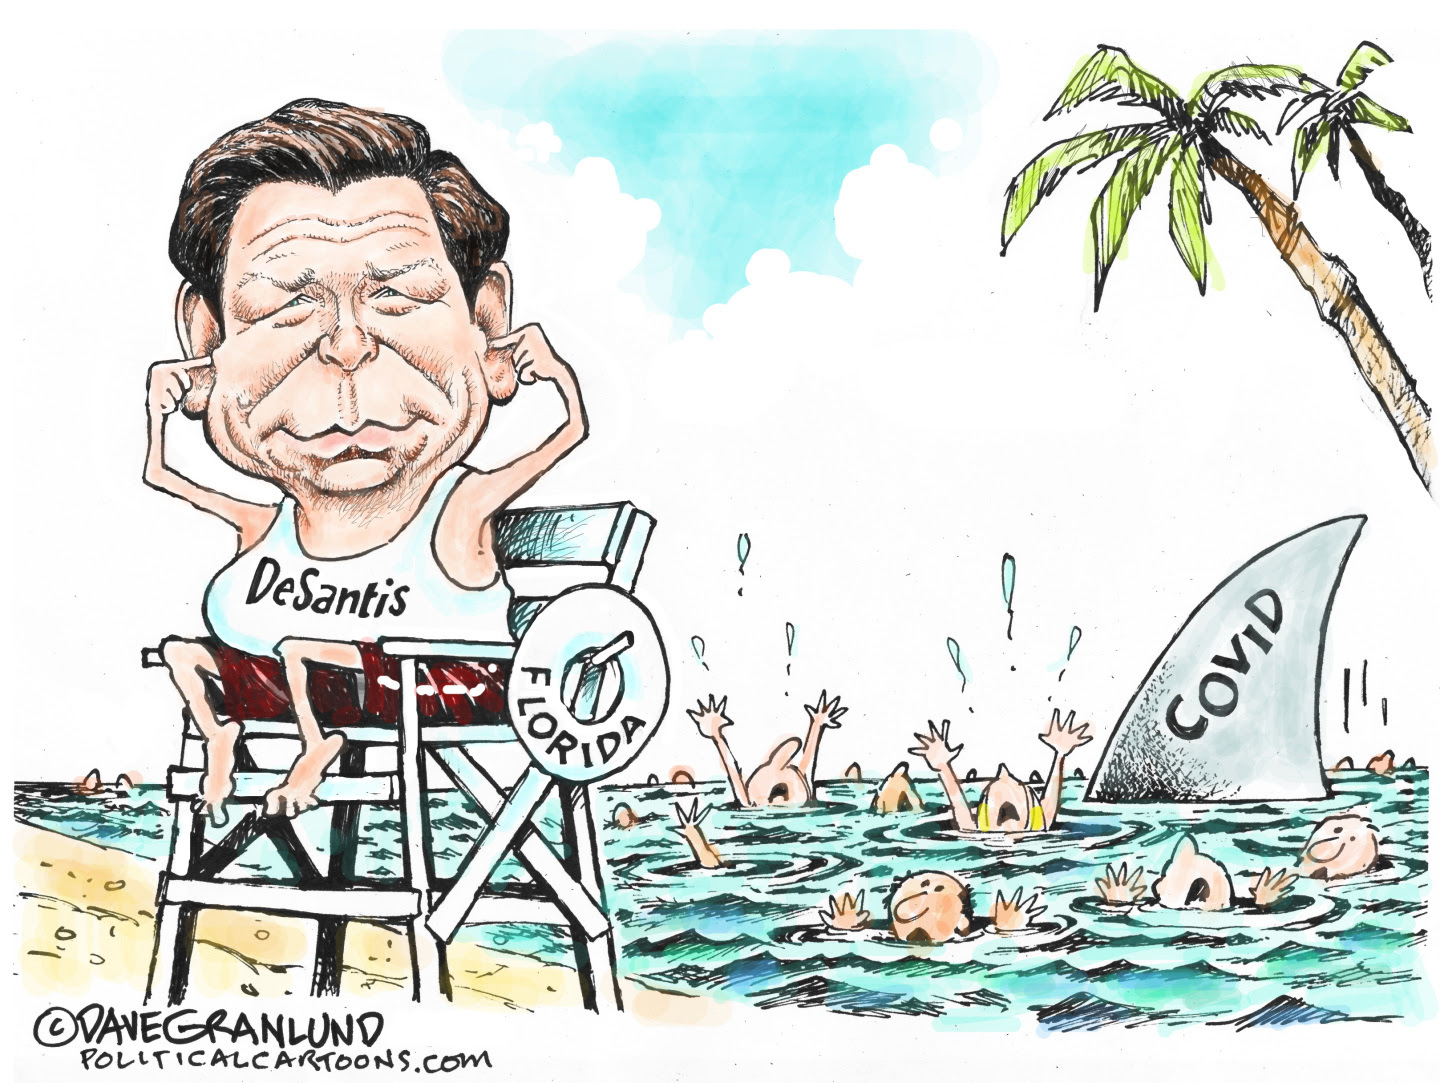 DeSantis jeopardizes the health of people in Florida to score political points.